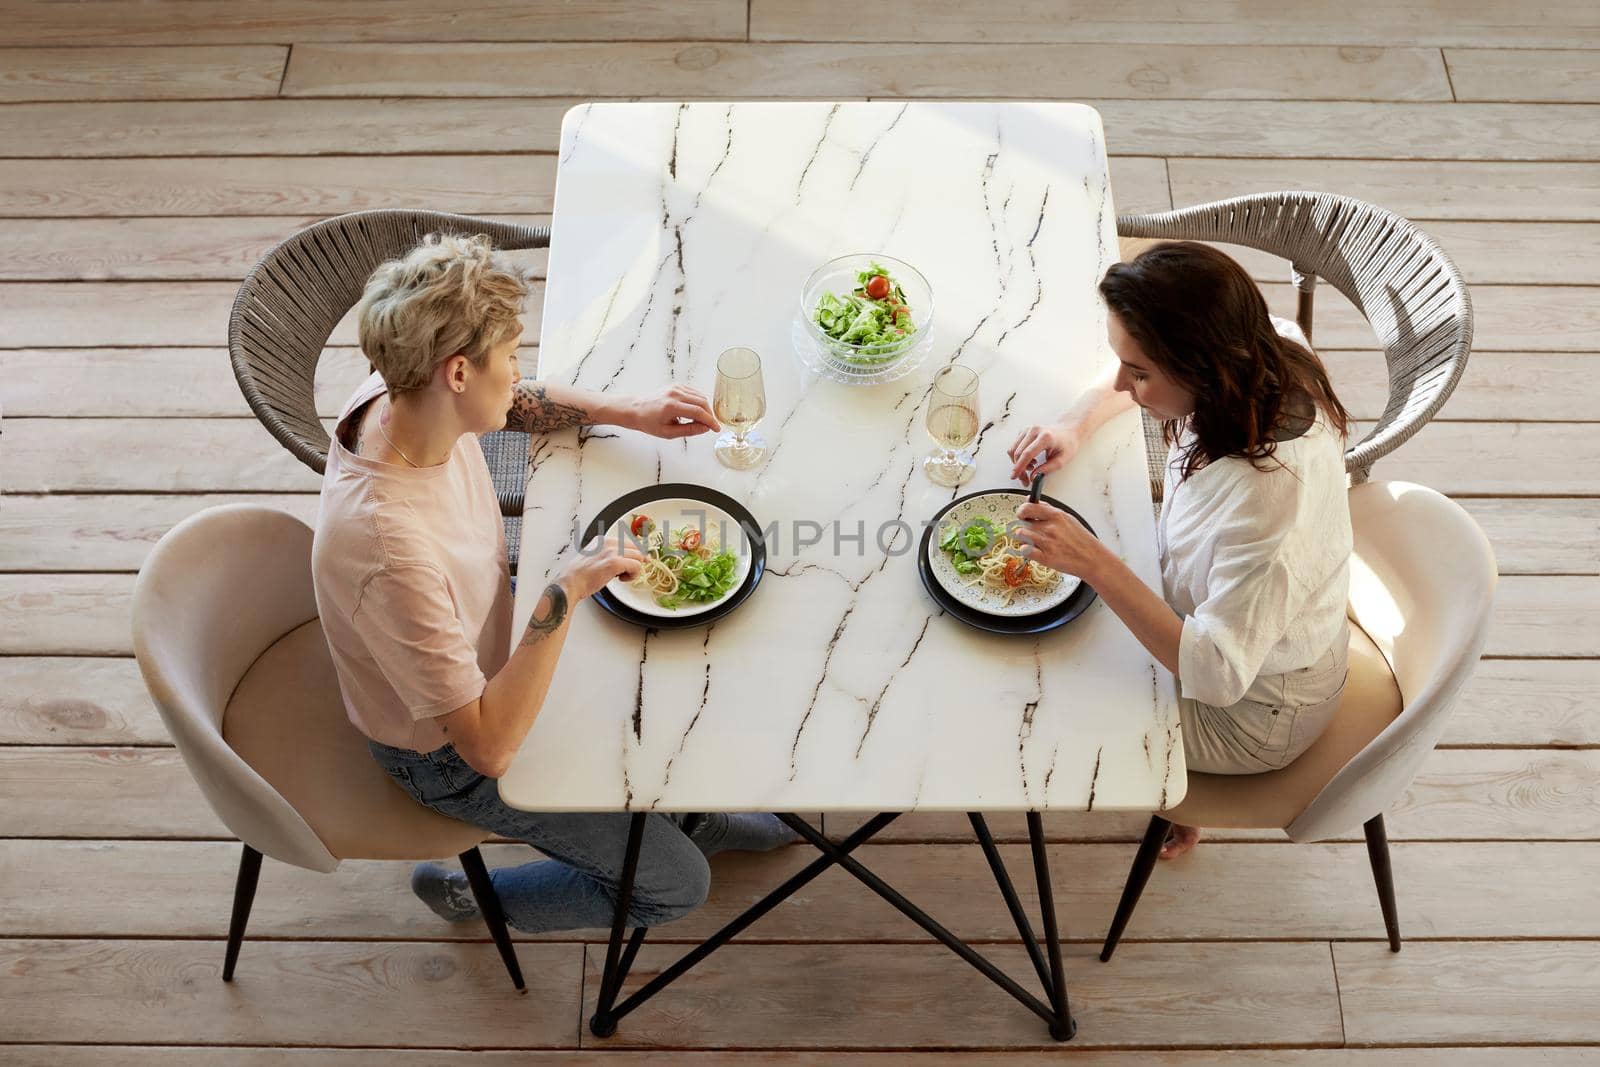 Couple enjoying dinner meal sitting at kitchen table together and drinking white wine, healthy eating view from above